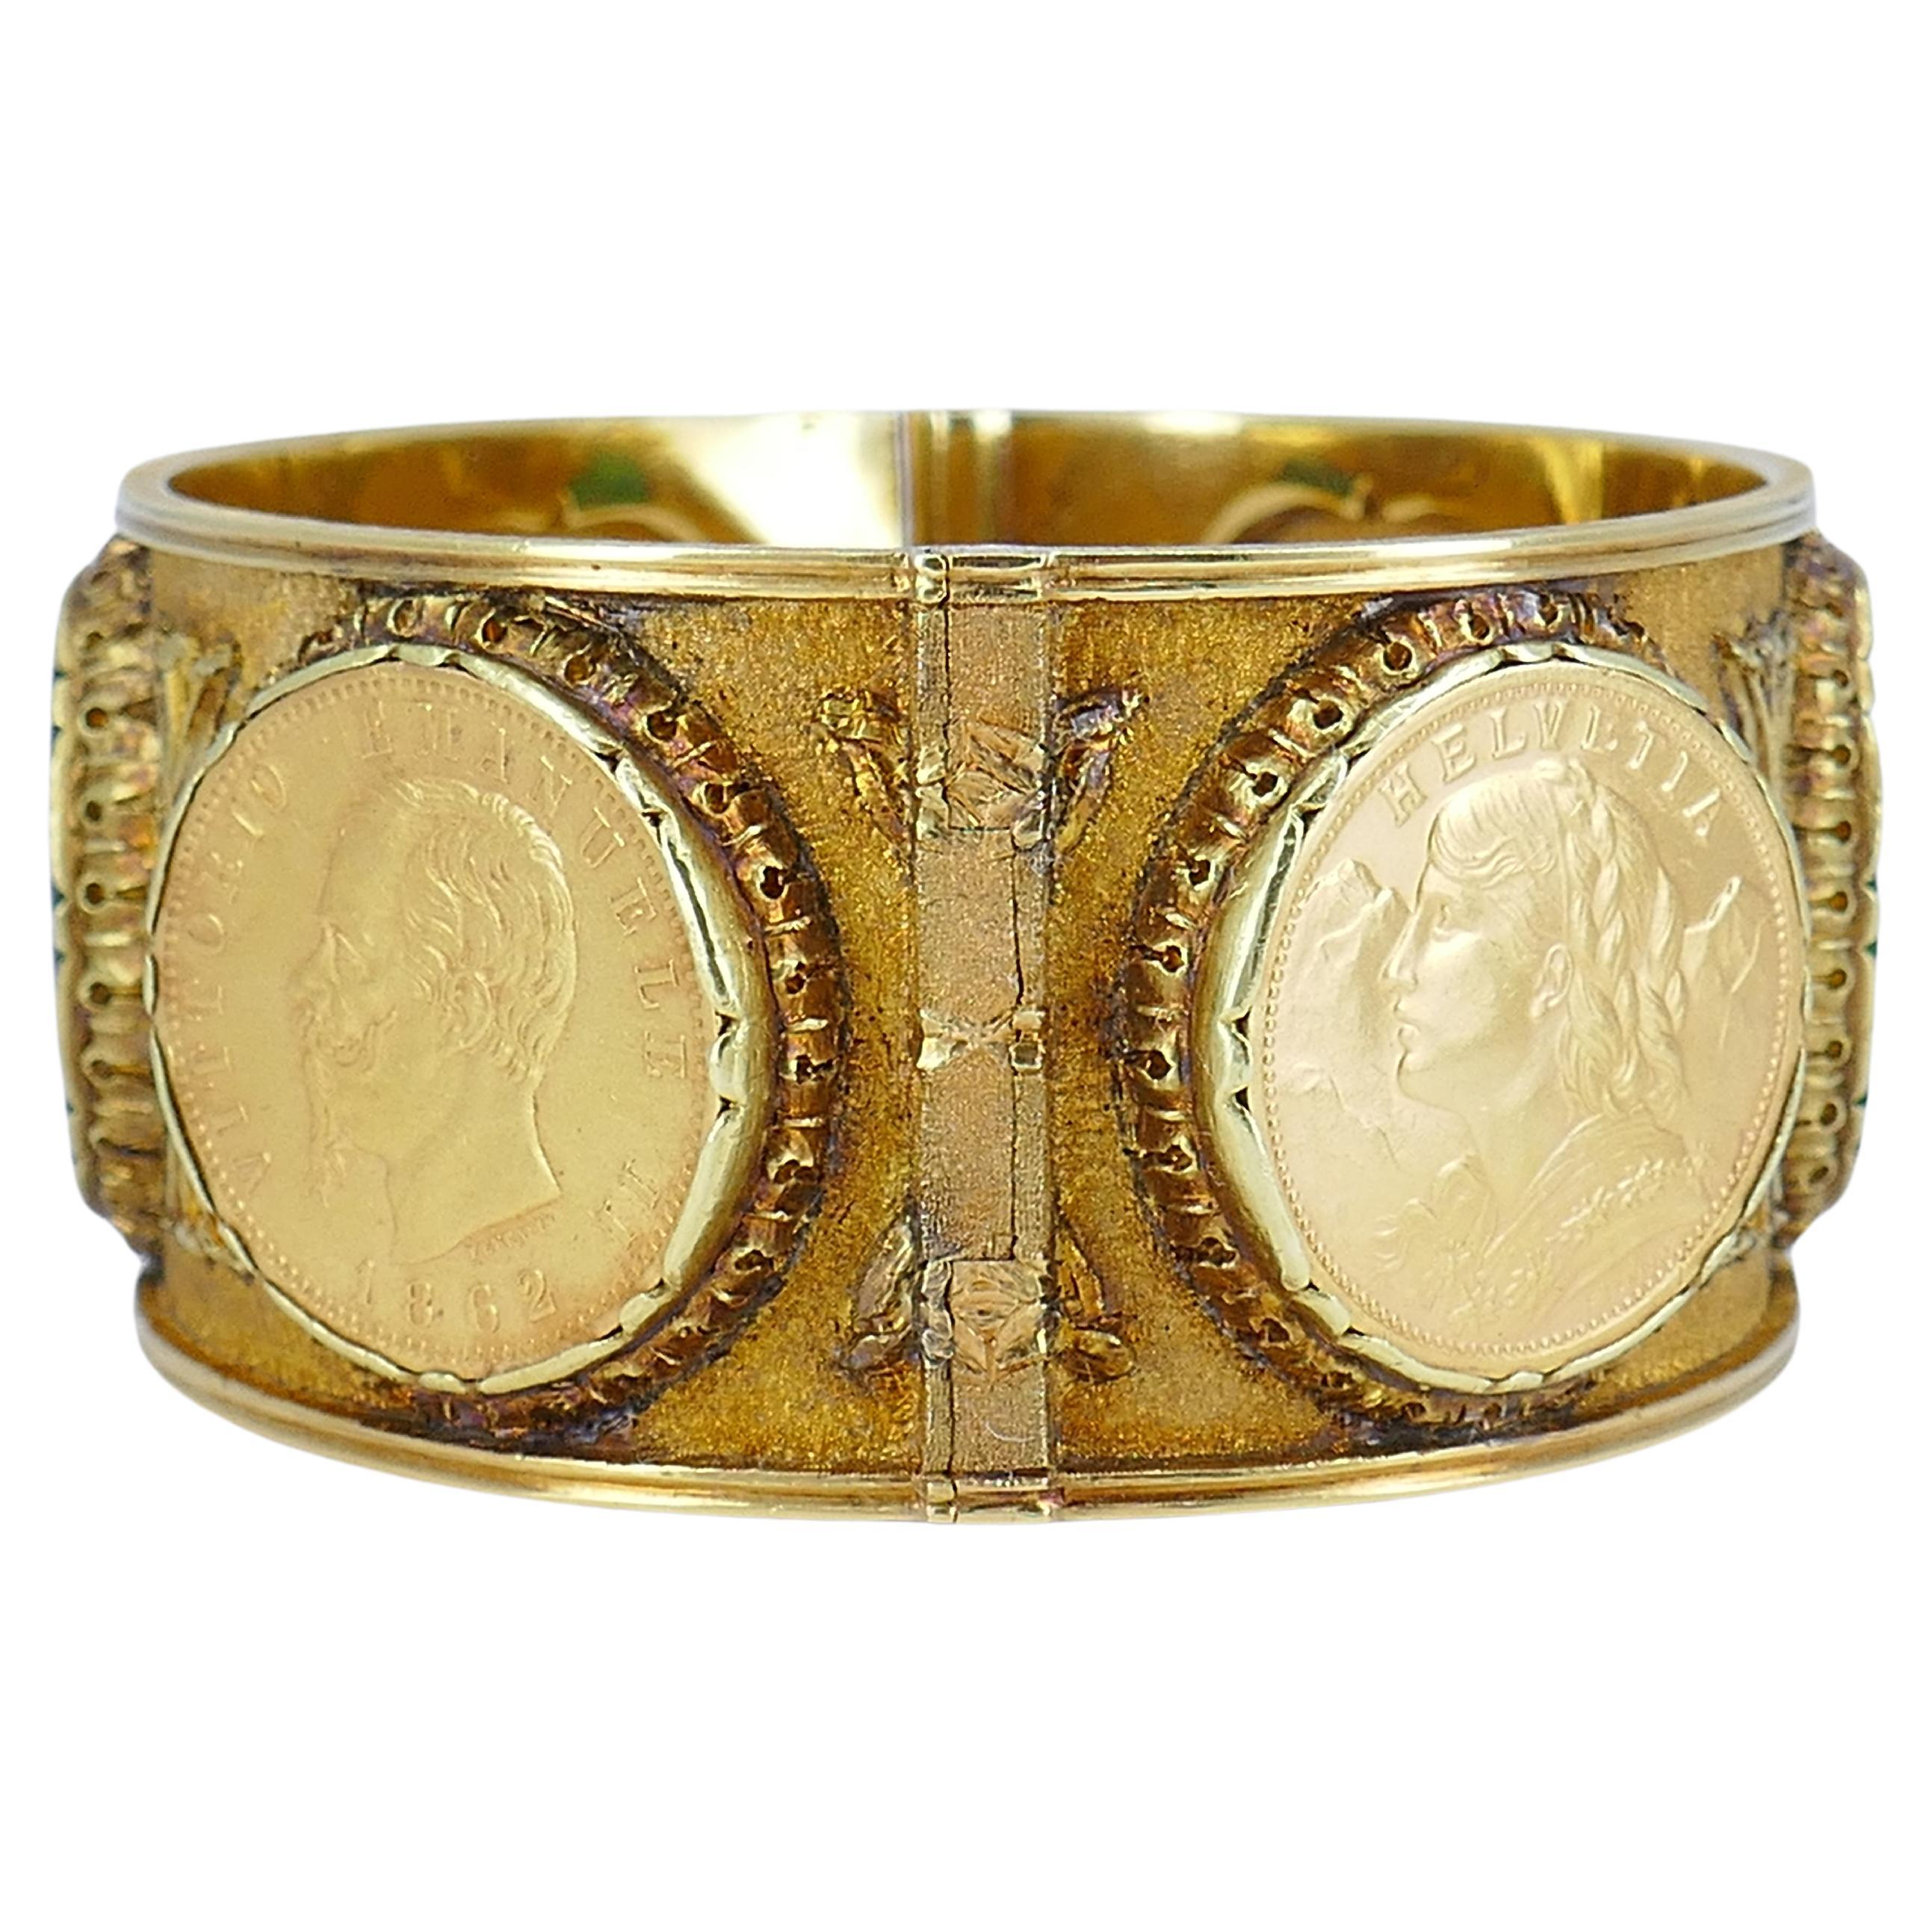 Mario Buccellati Gold Coin Bracelet Carved Jade Vintage Bangle Estate Jewelry In Good Condition For Sale In Beverly Hills, CA